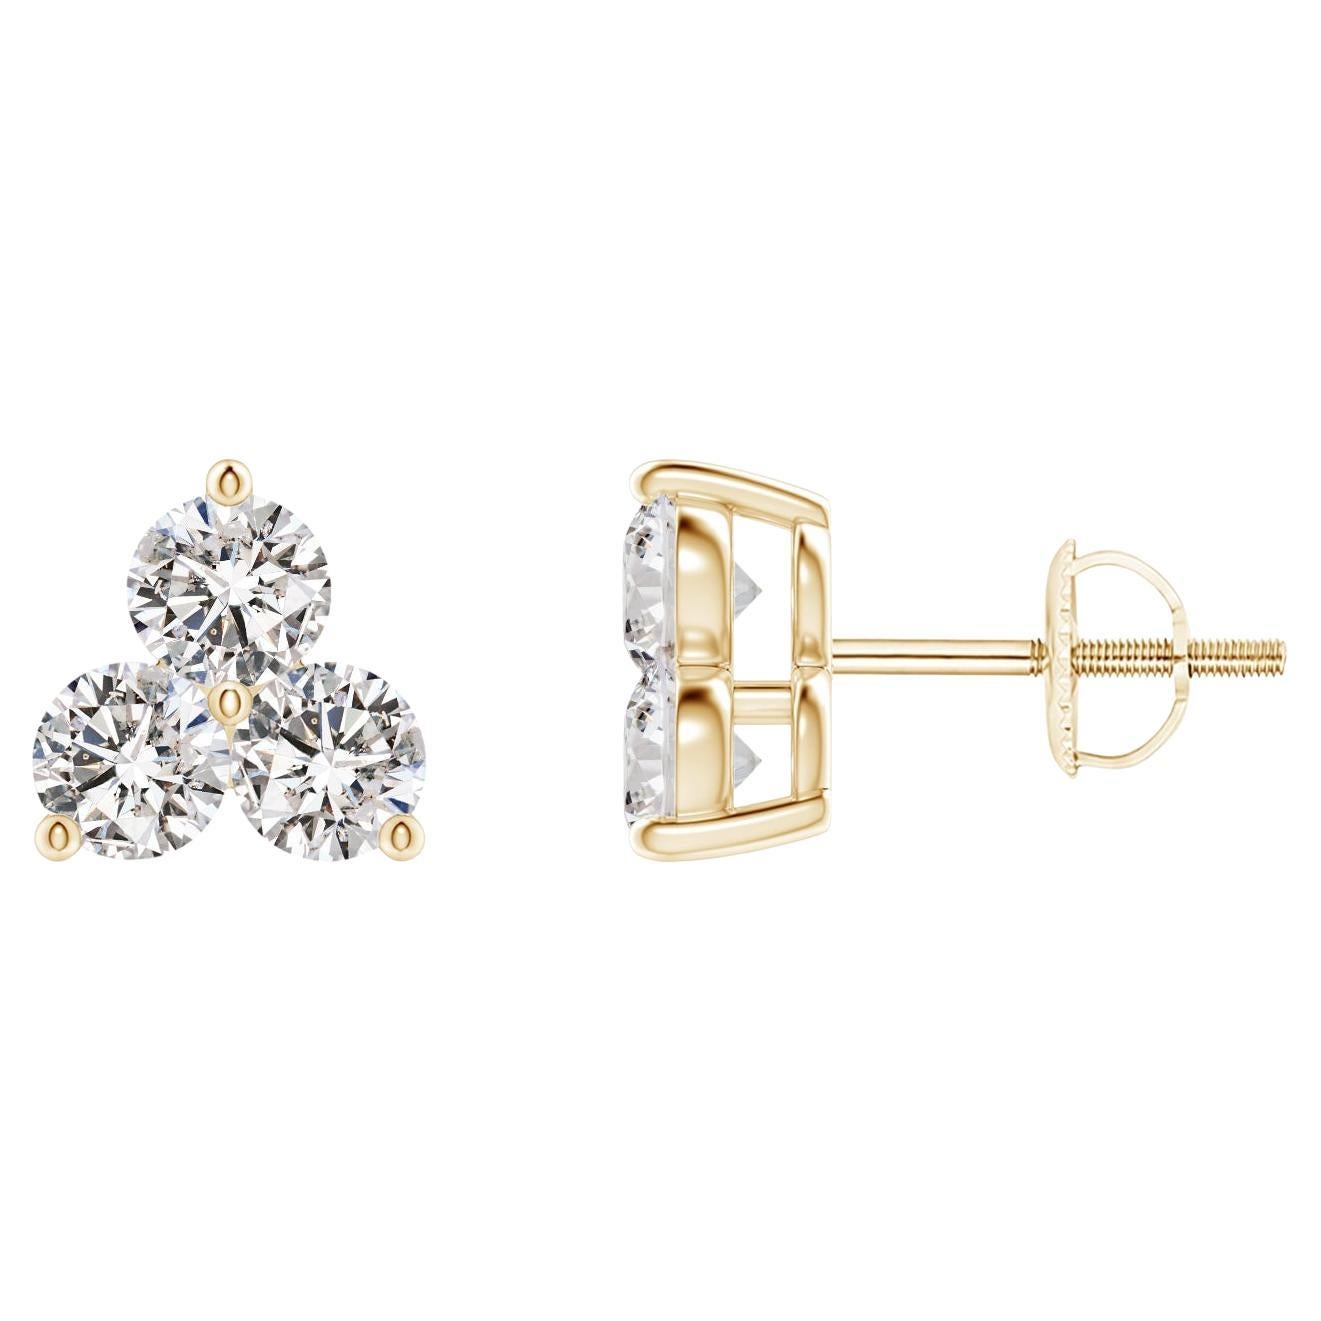 Natural Diamond Stud Earrings in 14K Yellow Gold (1.5cttw Color-I-J) For Sale